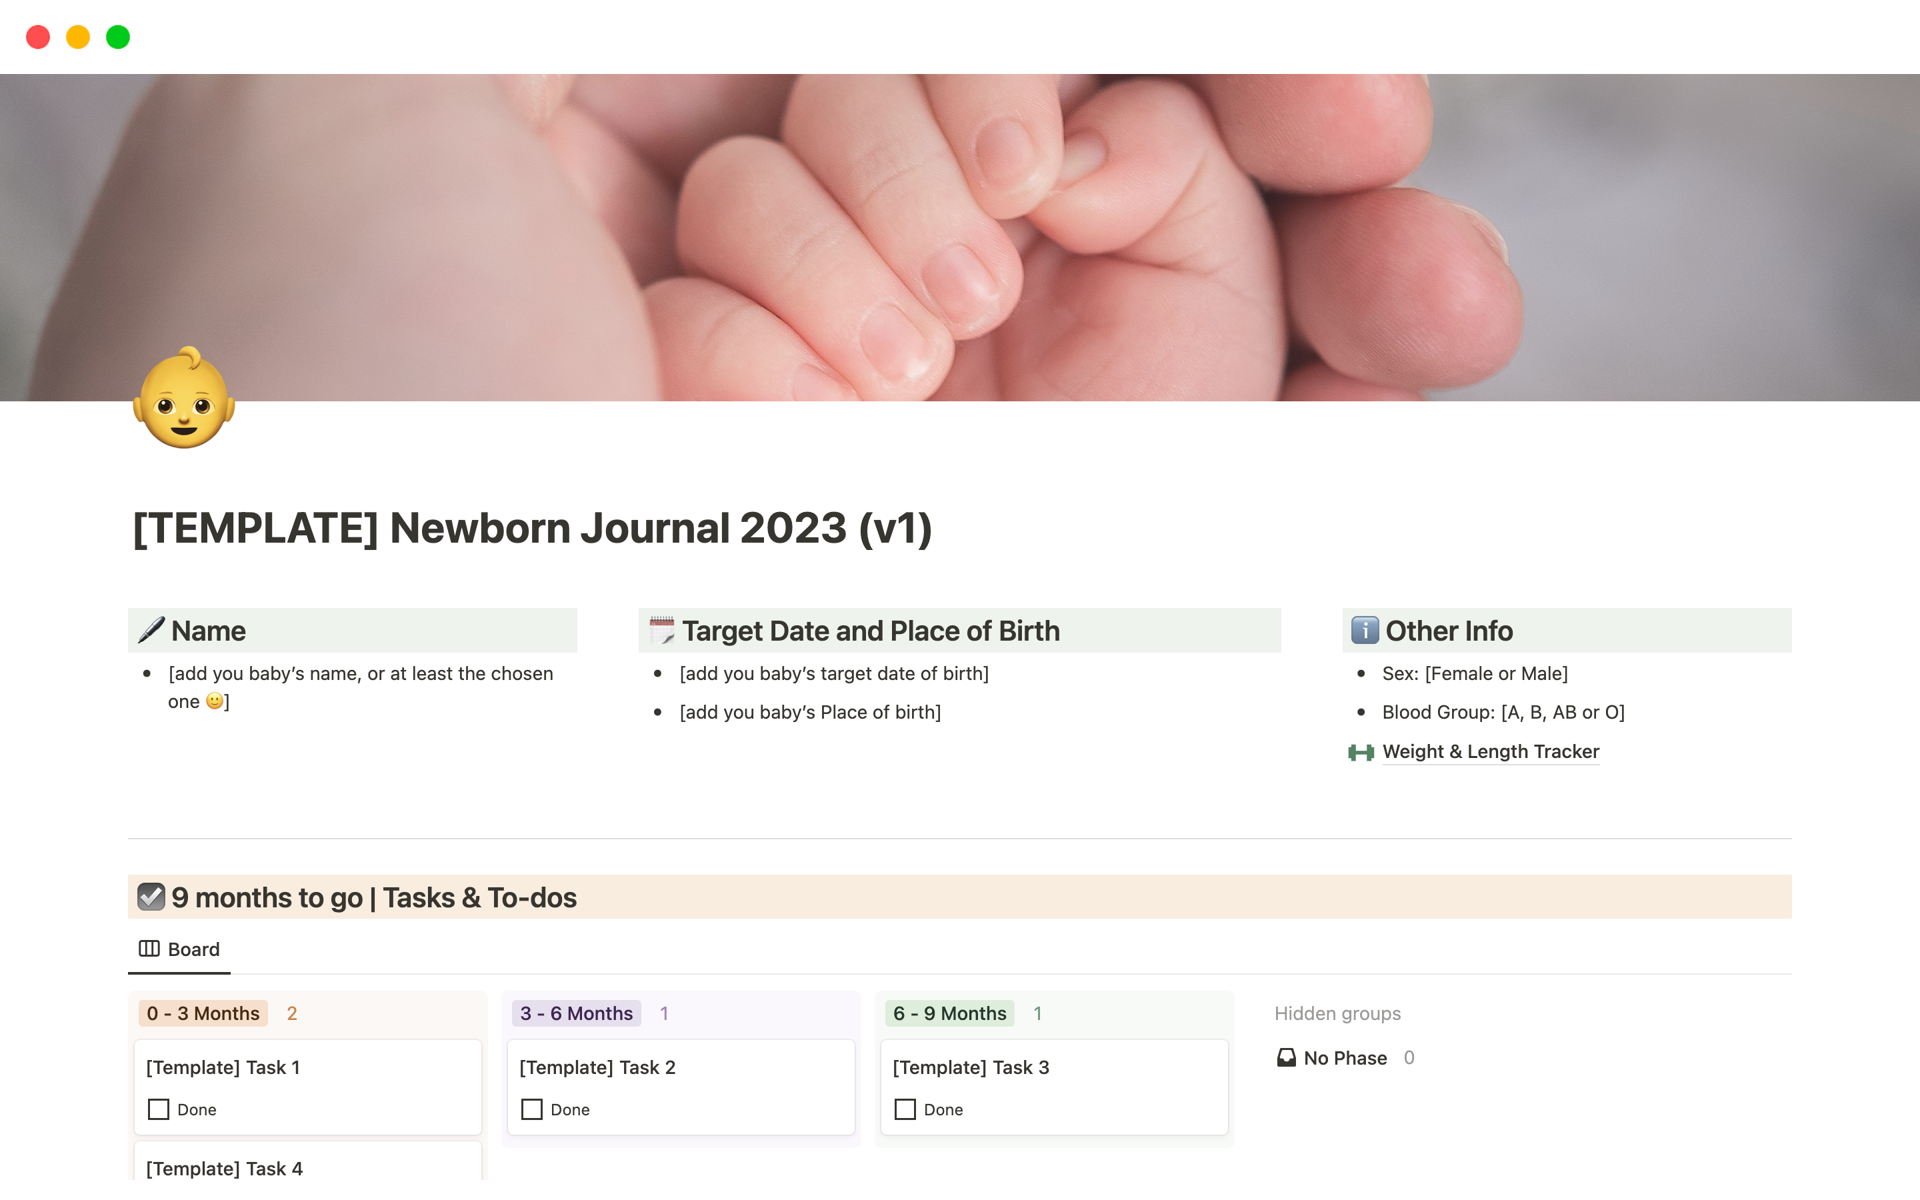 The Newborn Journal Template on Notion - this template focus on keeping track of visits, task, appointments and things to buy the 9 months prior to the magical arrival!